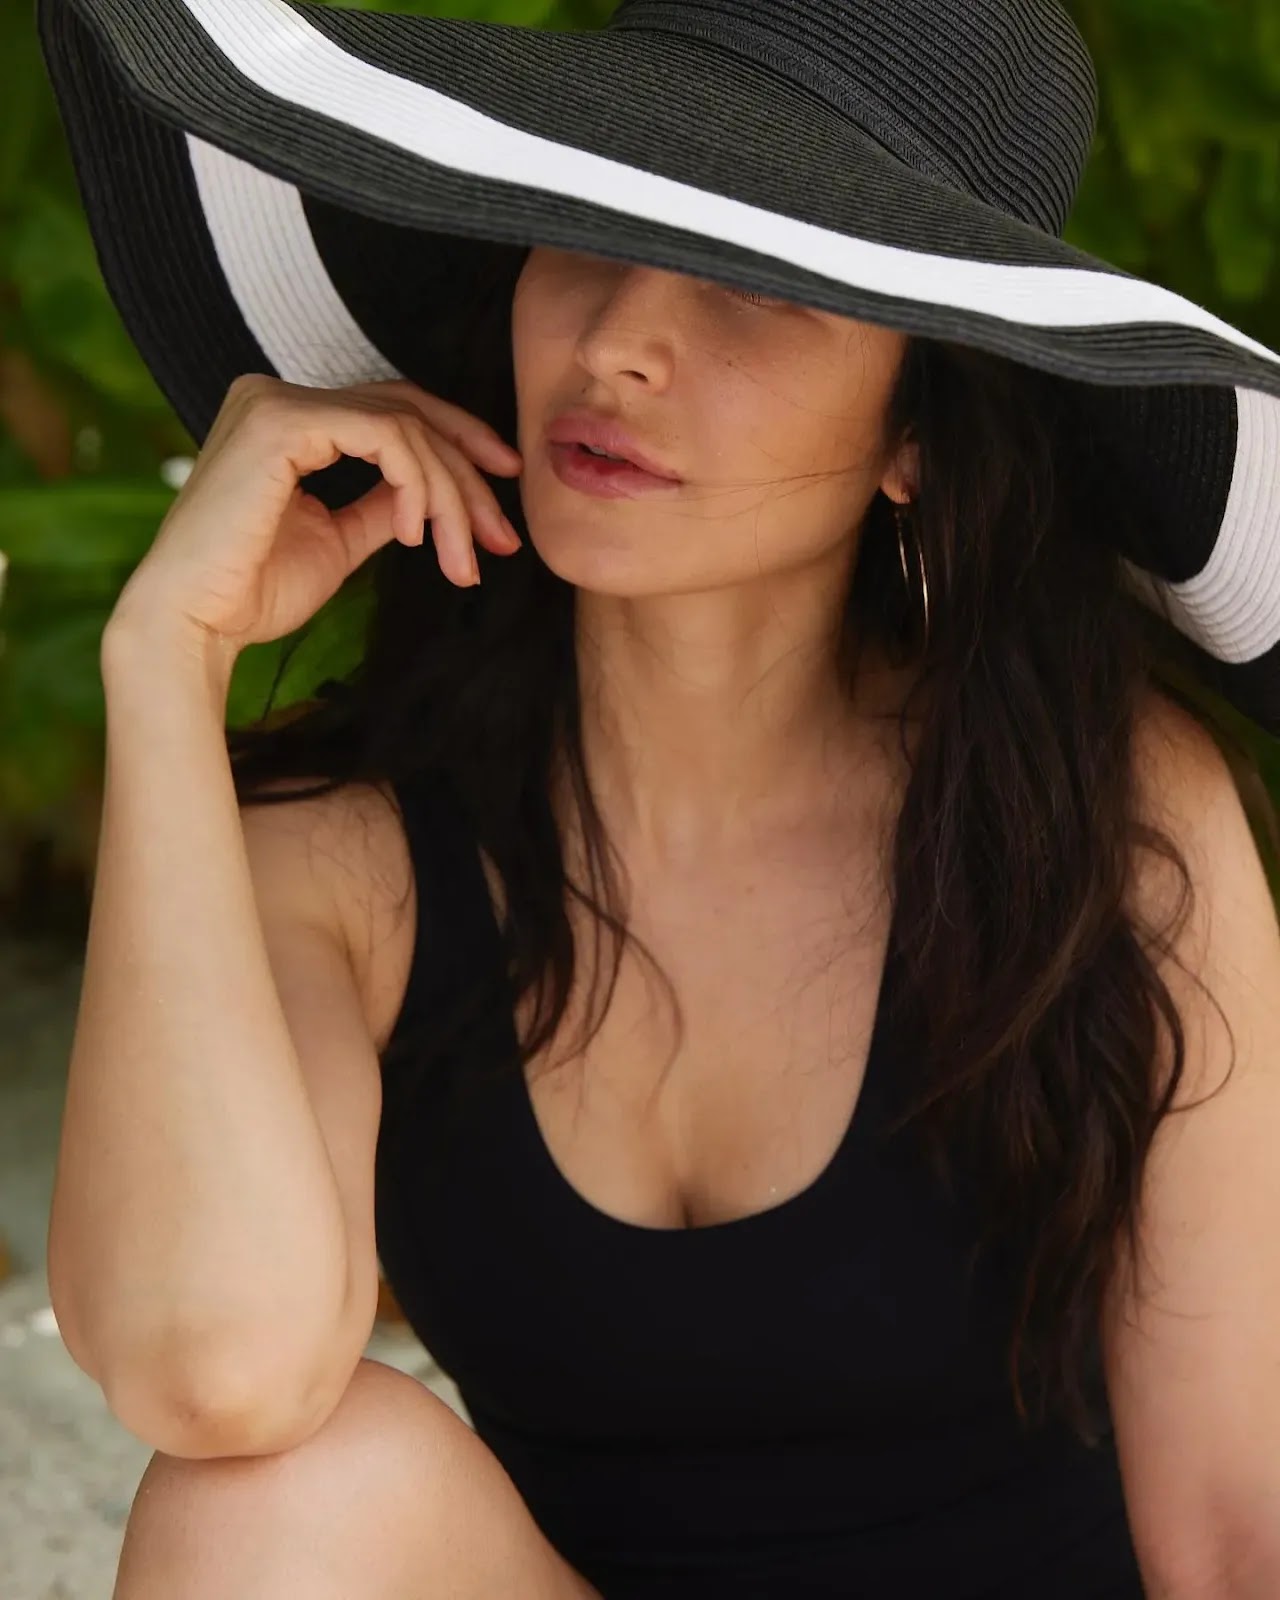 Katrina Kaif in black swimsuit sets internet on fire - see latest hot  photos.